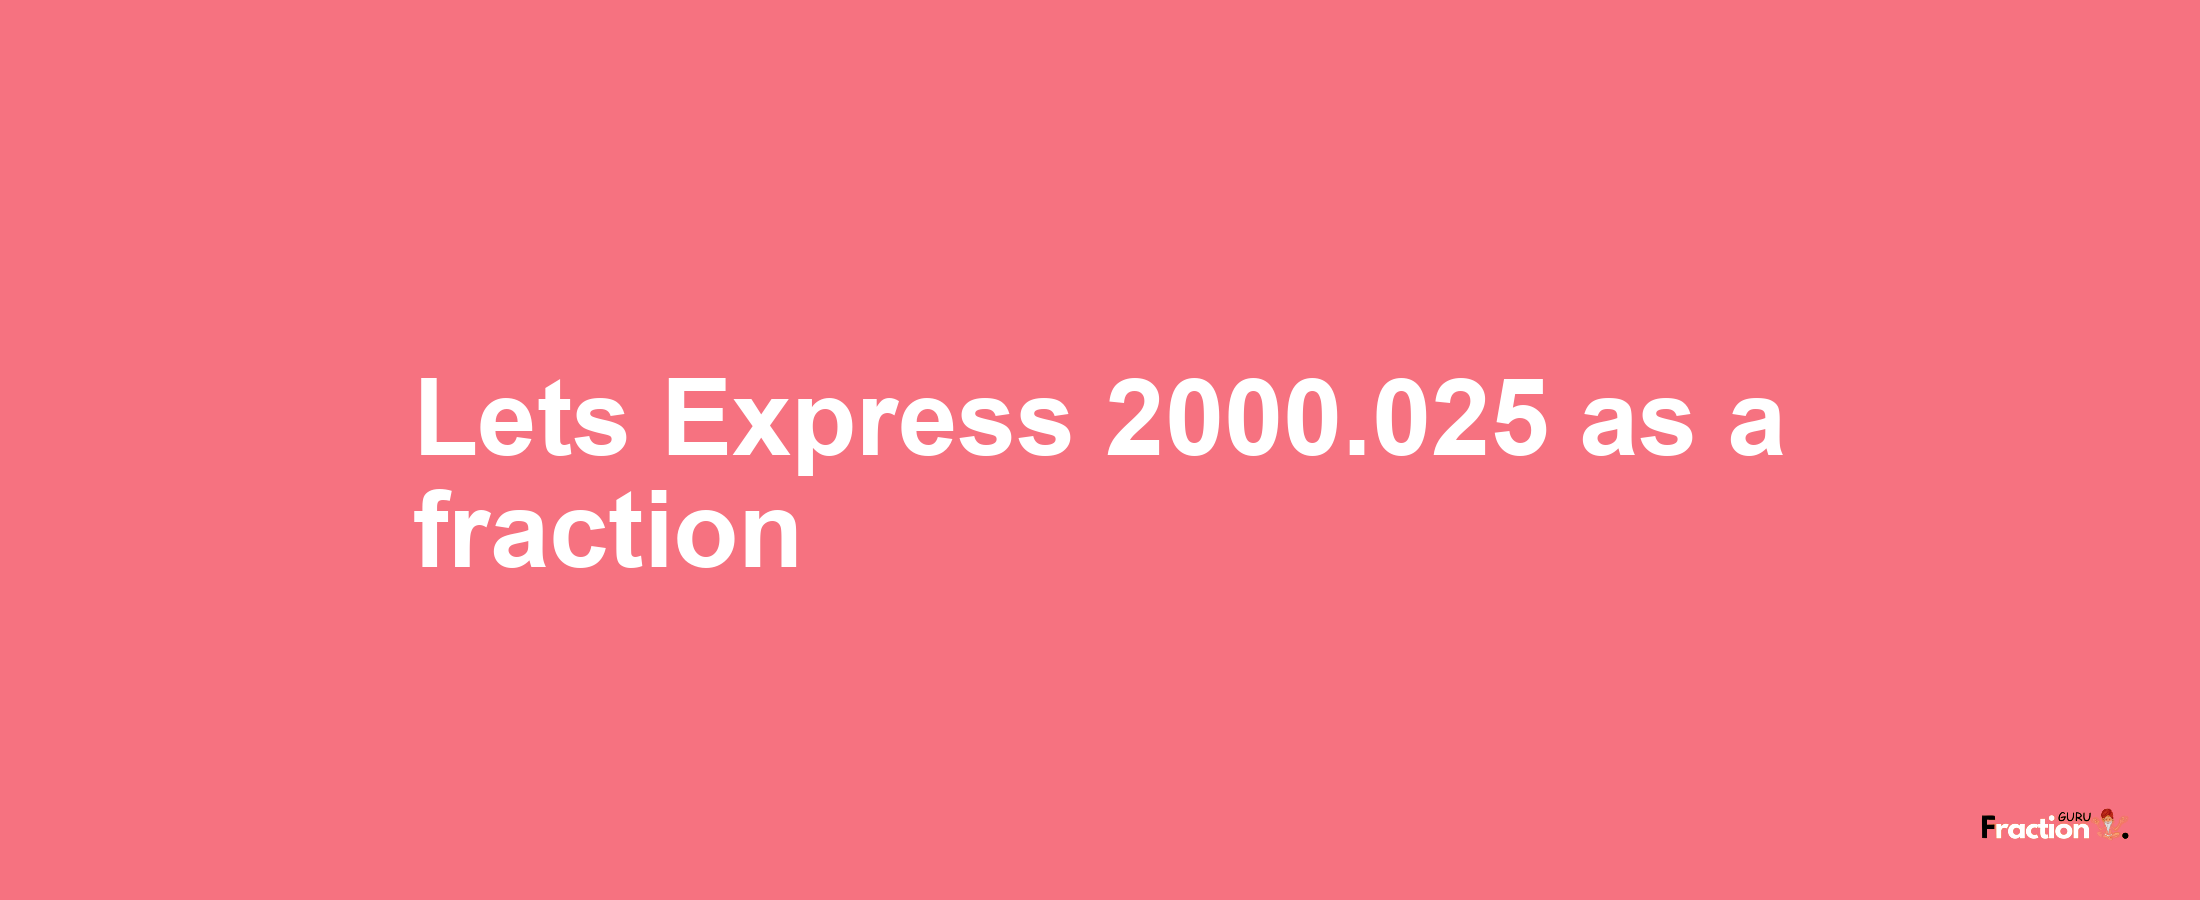 Lets Express 2000.025 as afraction